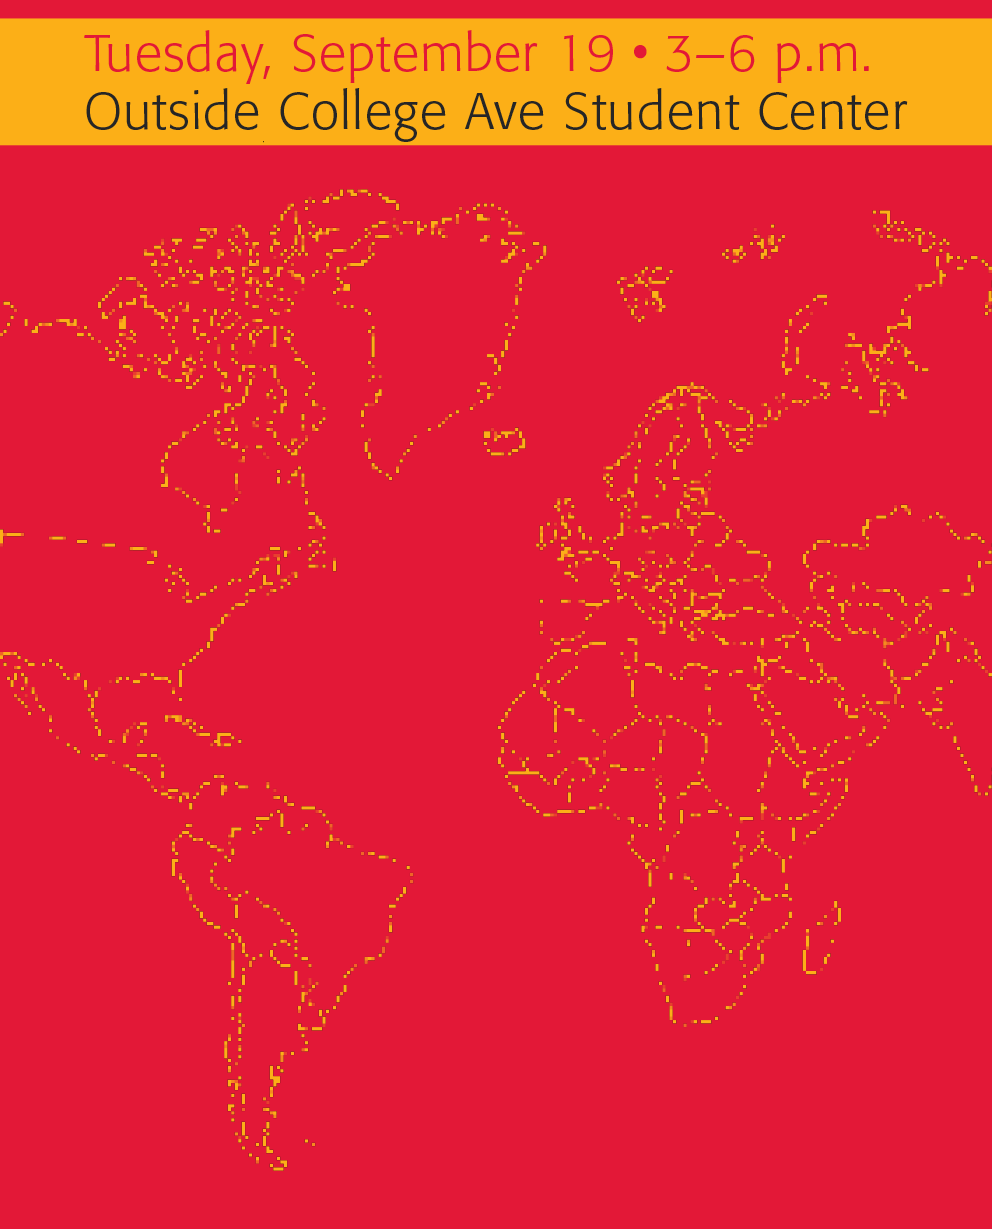 Rutgers Global - Tuesday, September 19, 3 to 6 p.m., Outside College Avenue Student Center, Rutgers 2017 Fall Study Abroad Fair